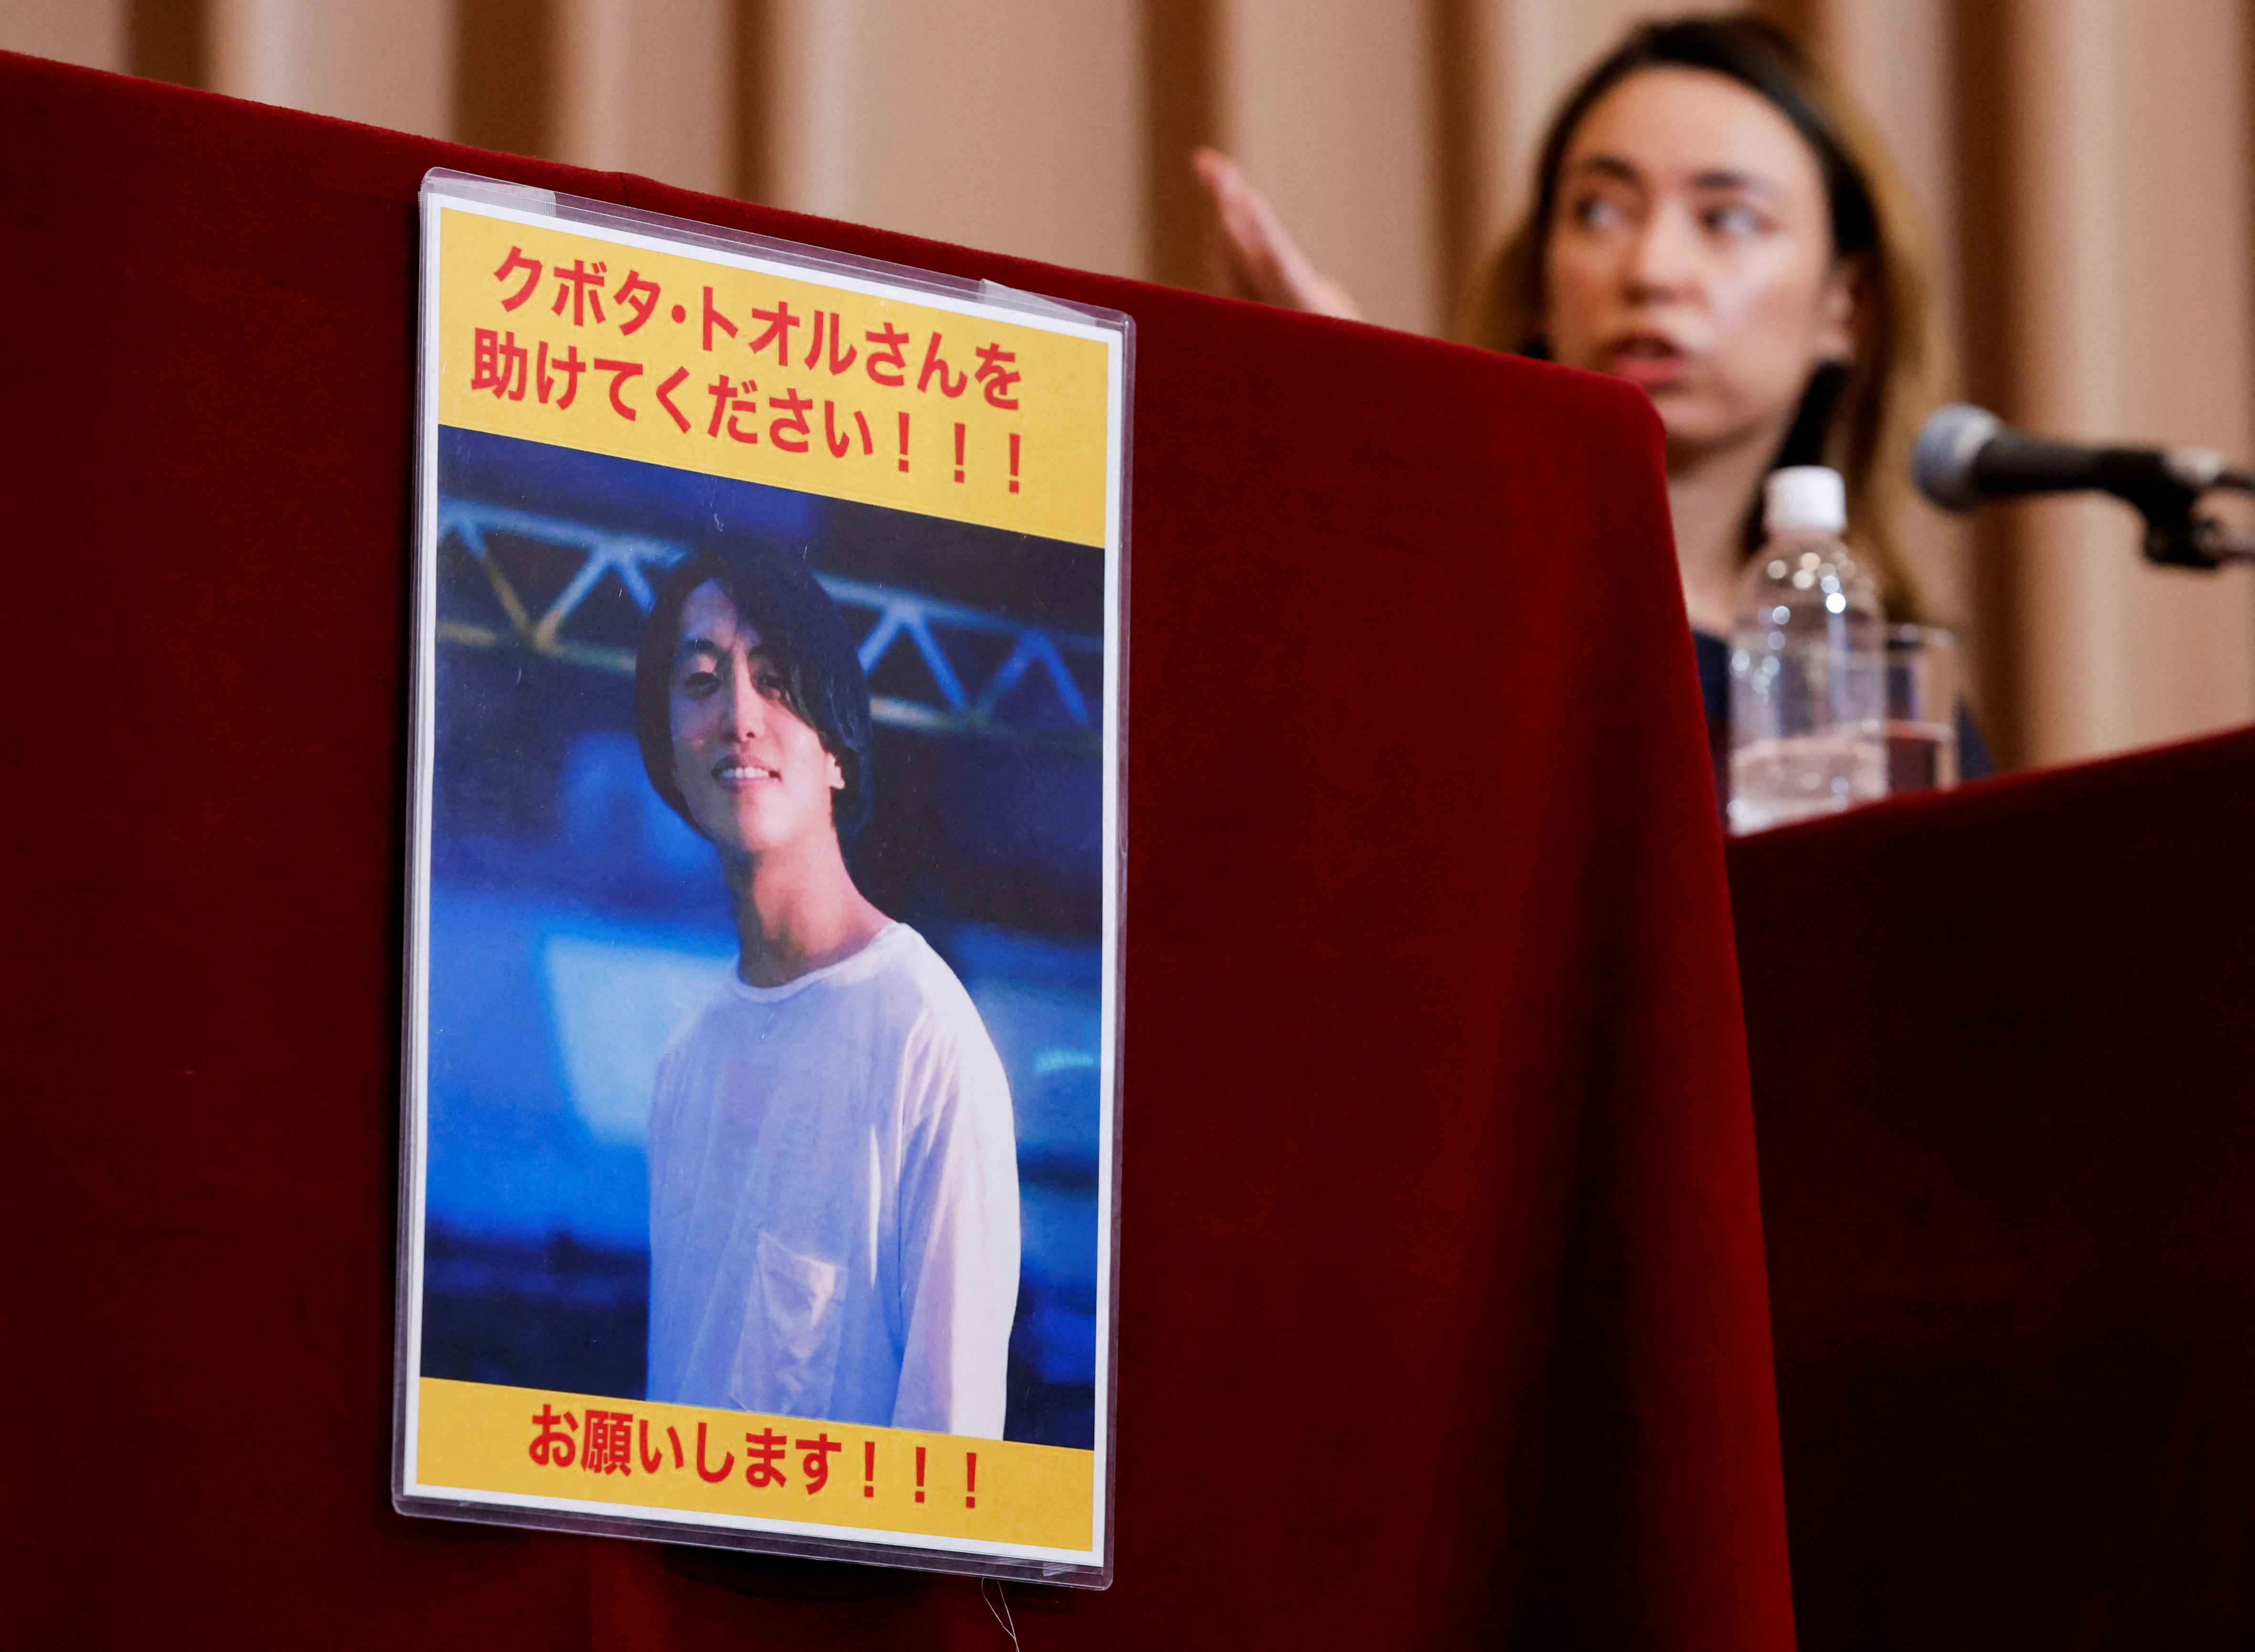 A portrait photo of Japanese documentary filmmaker Toru Kubota, who has been detained in Myanmar, is displayed during a news conference in Tokyo